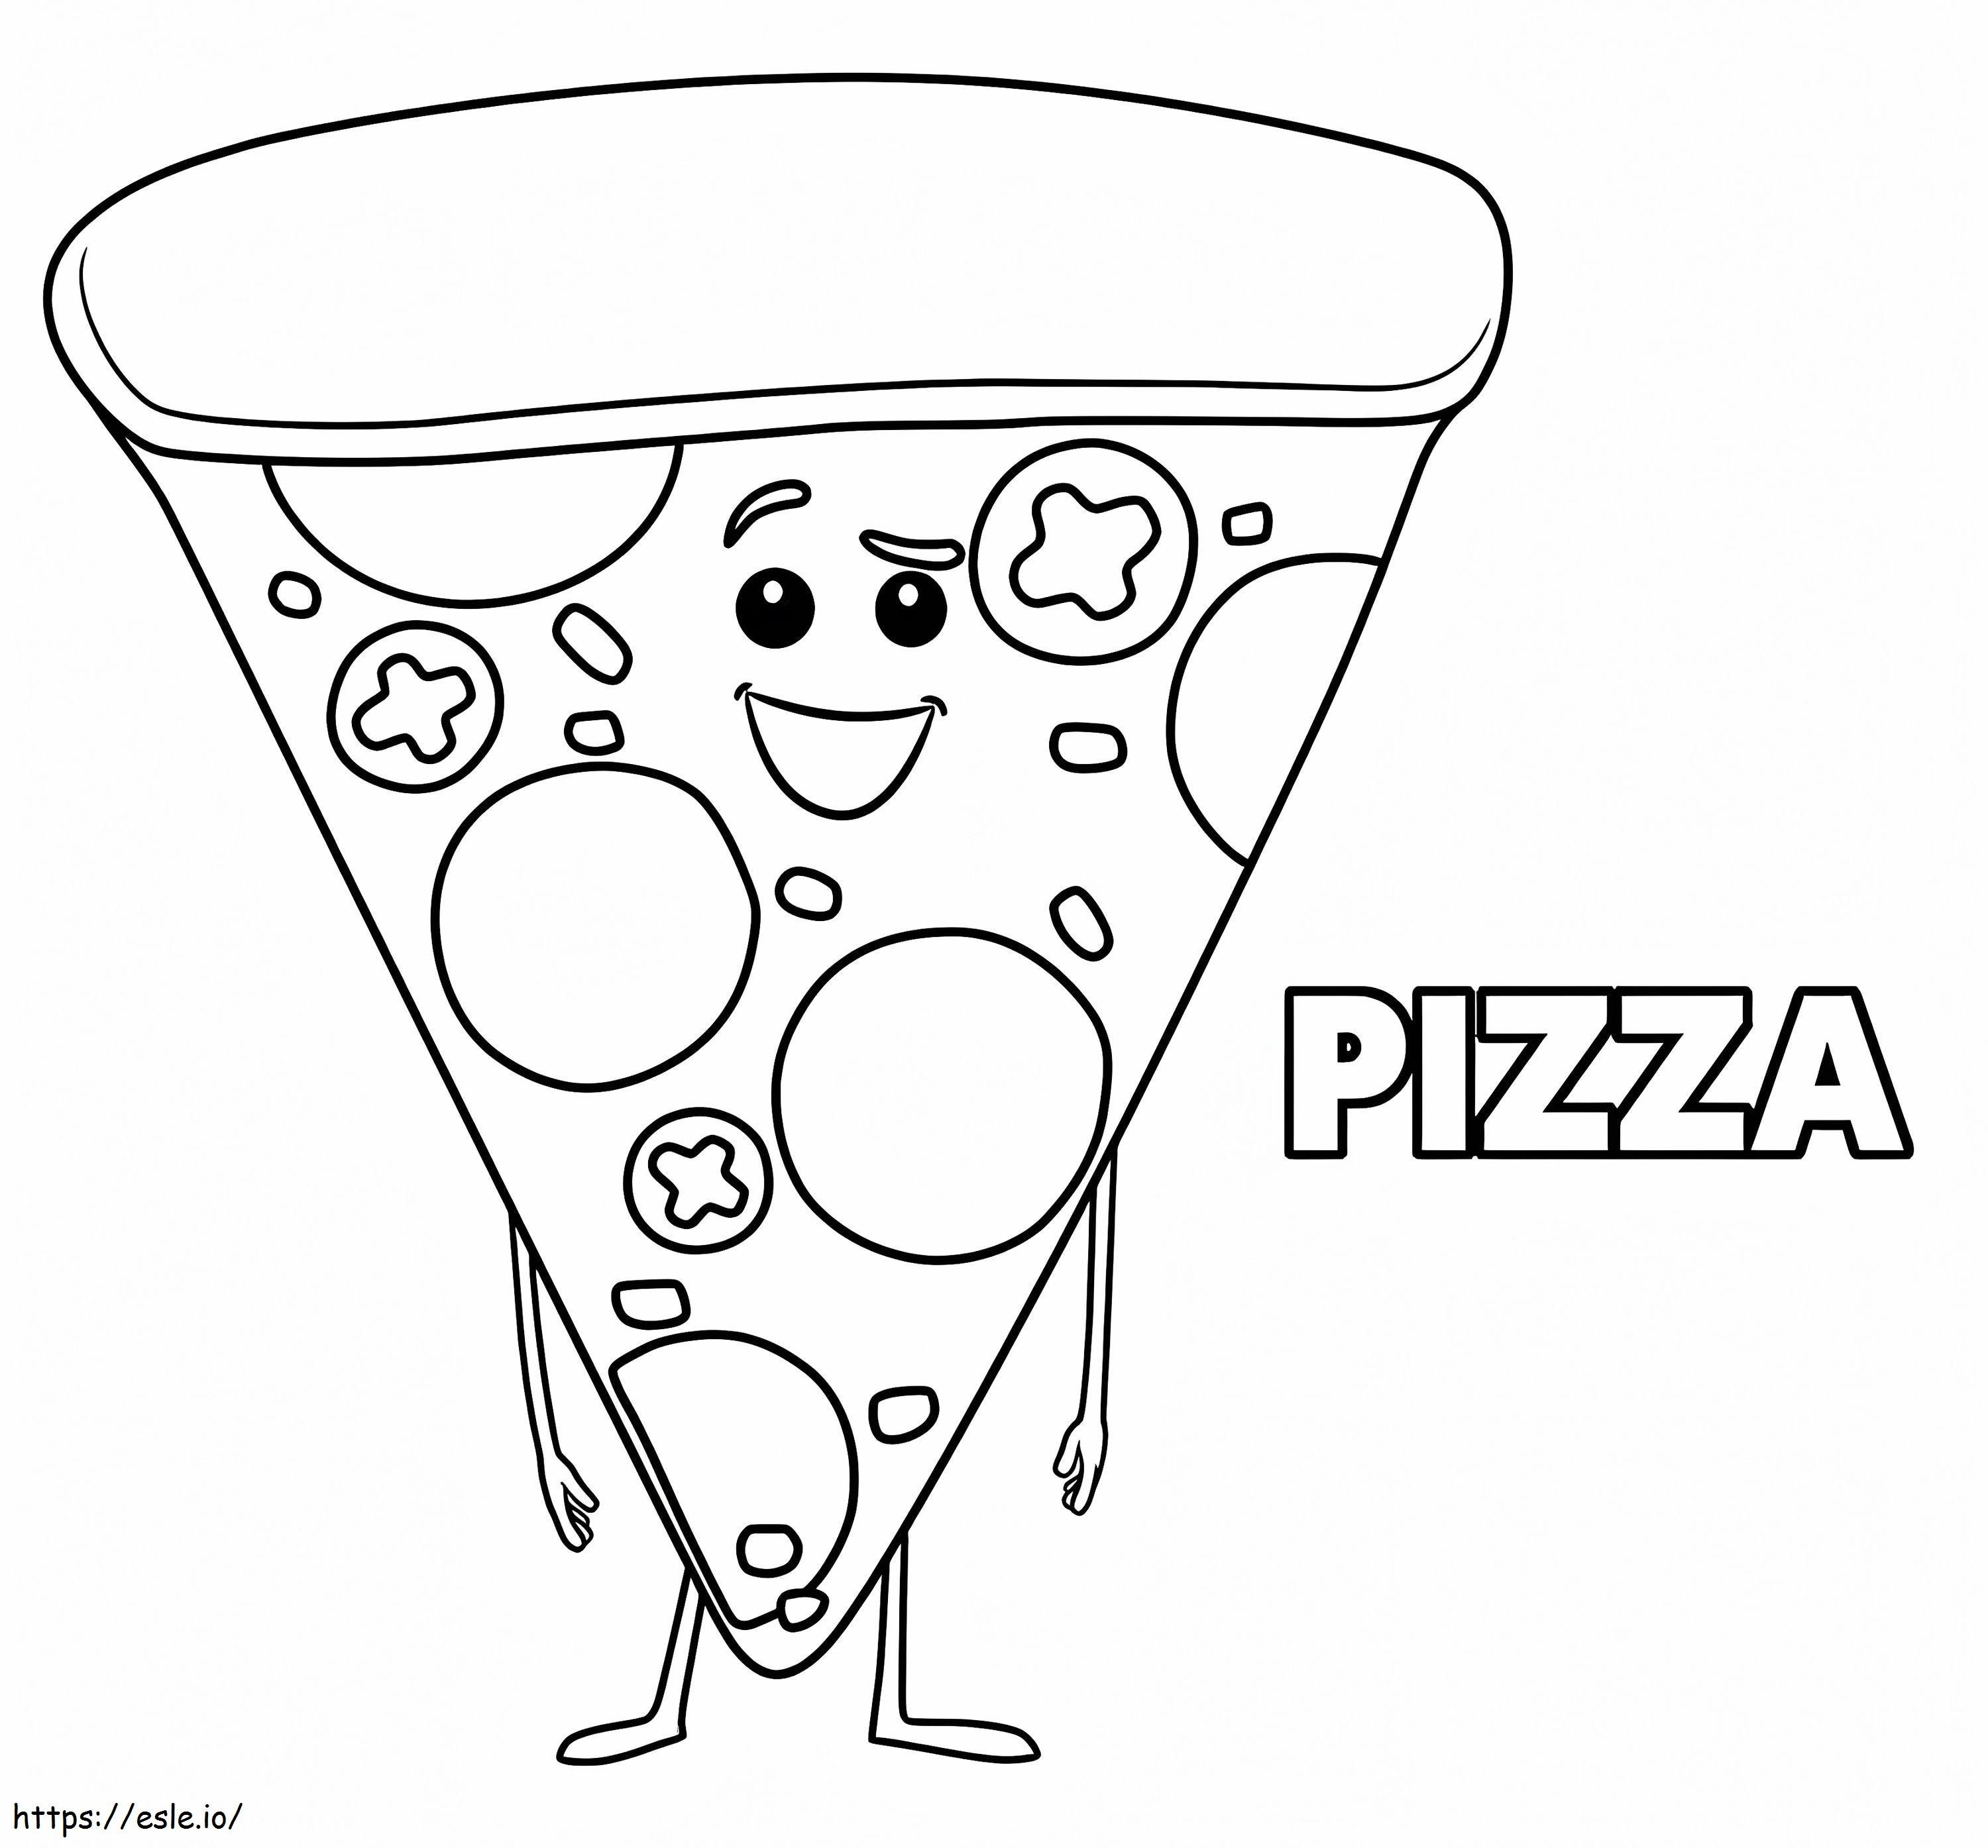 Pizza From The Emoji Movie coloring page